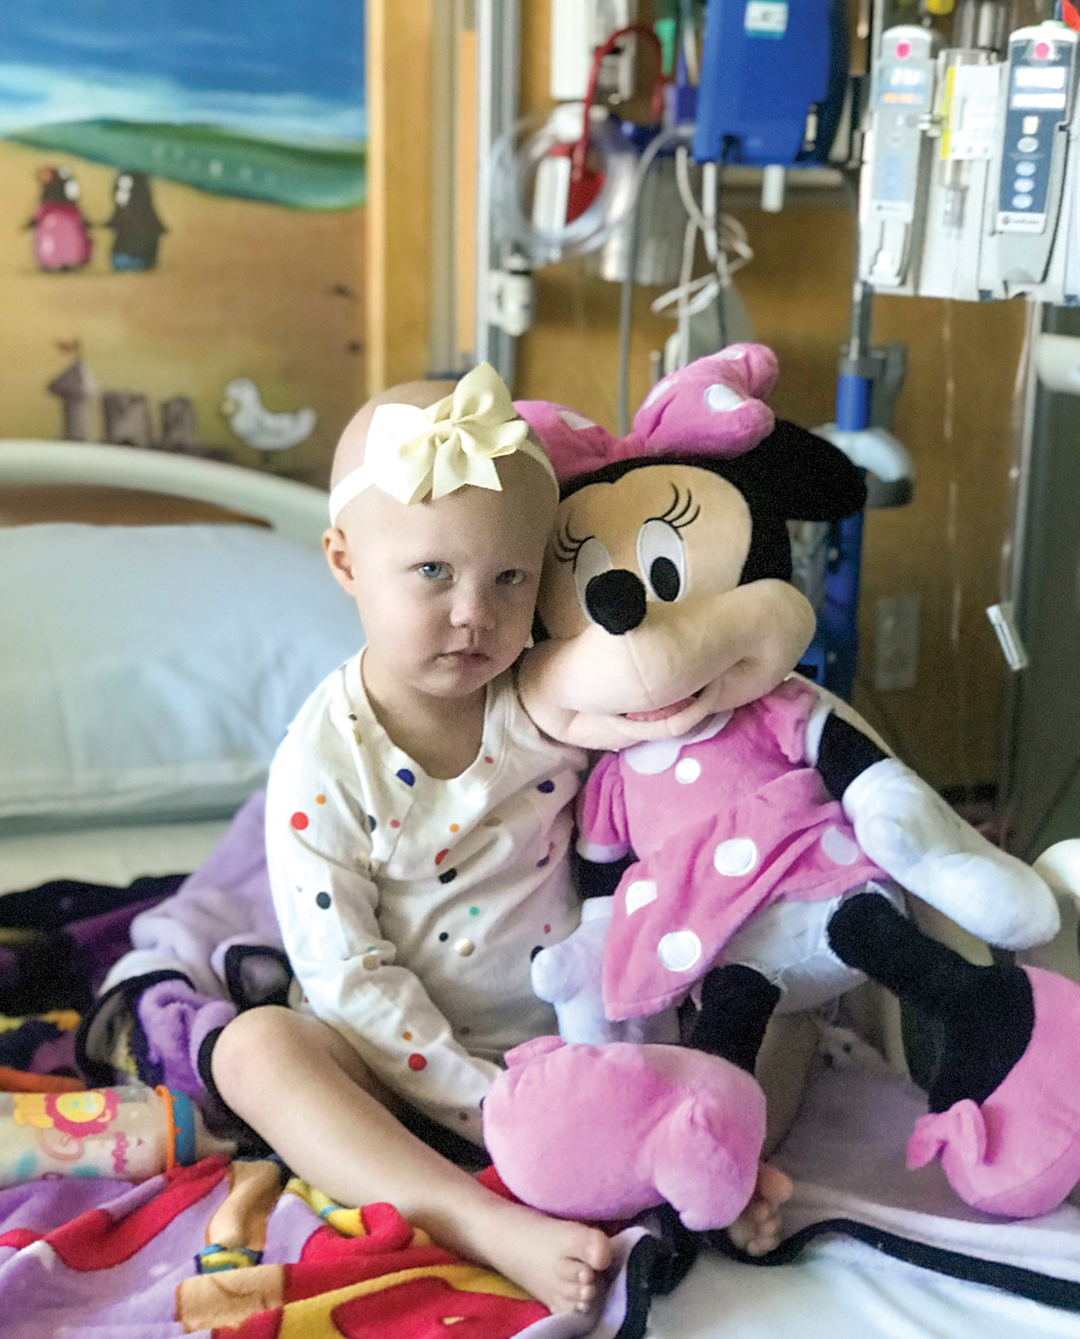 Sick child in hospital bed holding Minnie Mouse stuffed animal